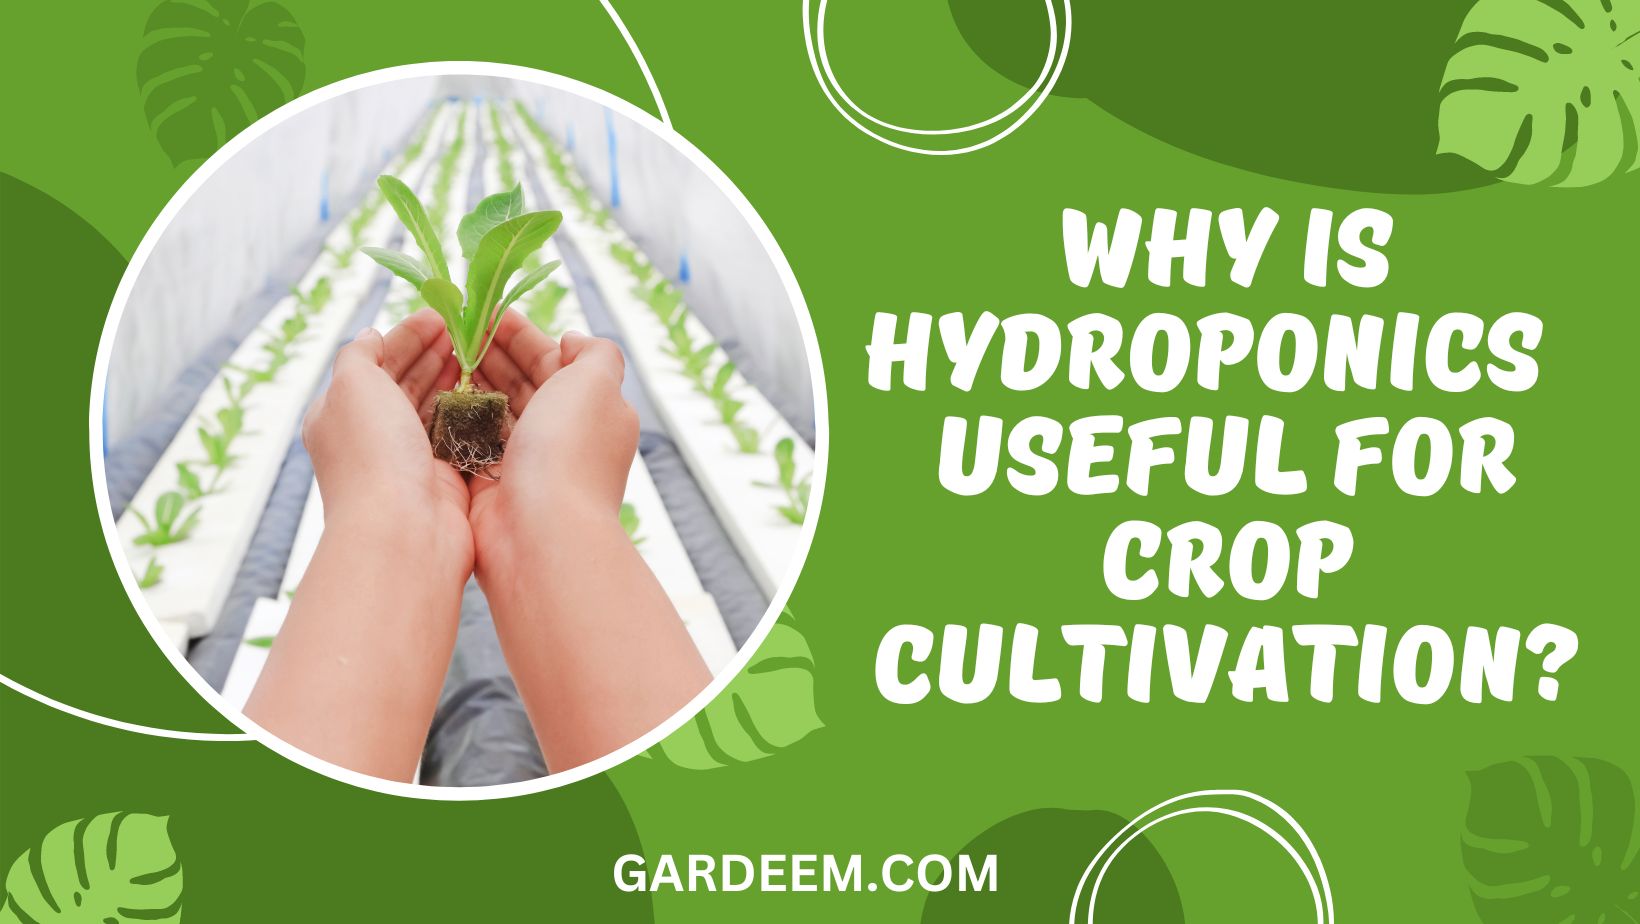 Hydroponics Useful For Crop Cultivation